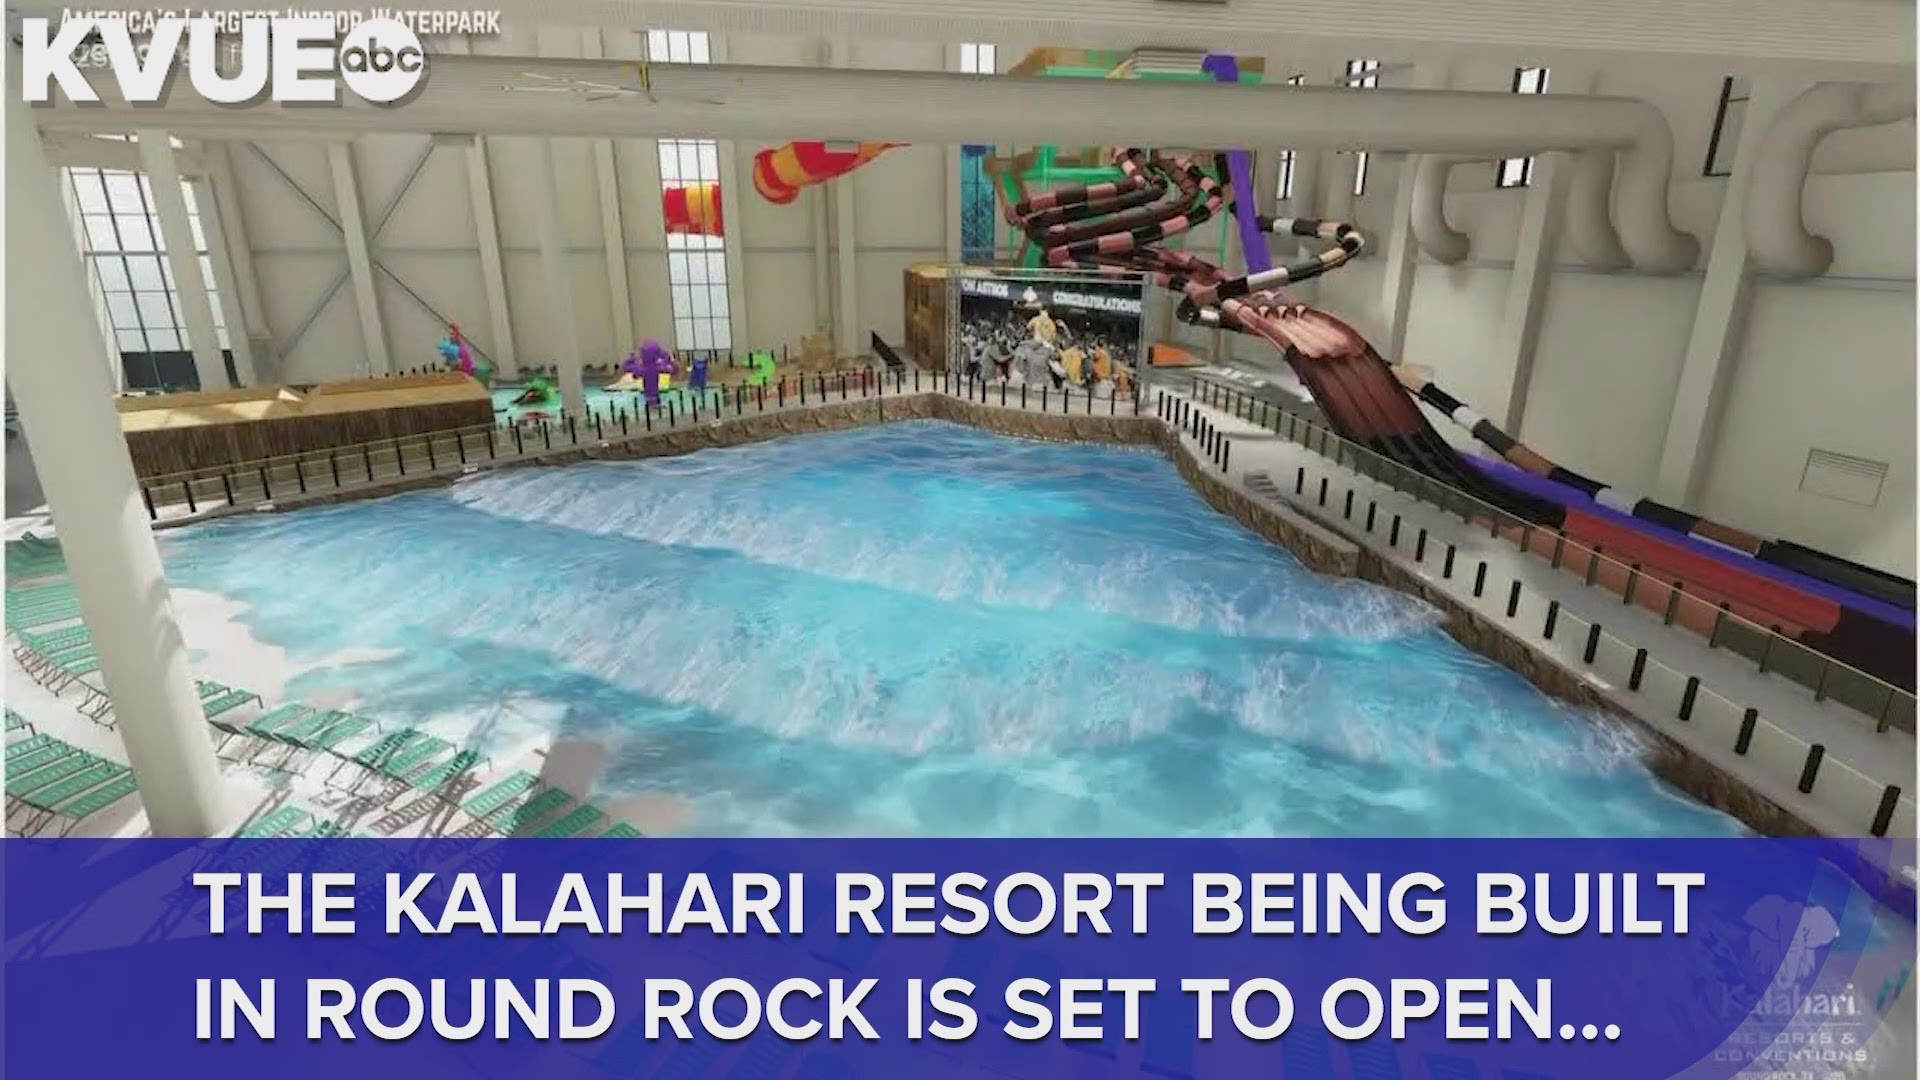 The Kalahari Resort will be home to the largest indoor waterpark in America. It is being built on US 79 in Round Rock near Dell Diamond.